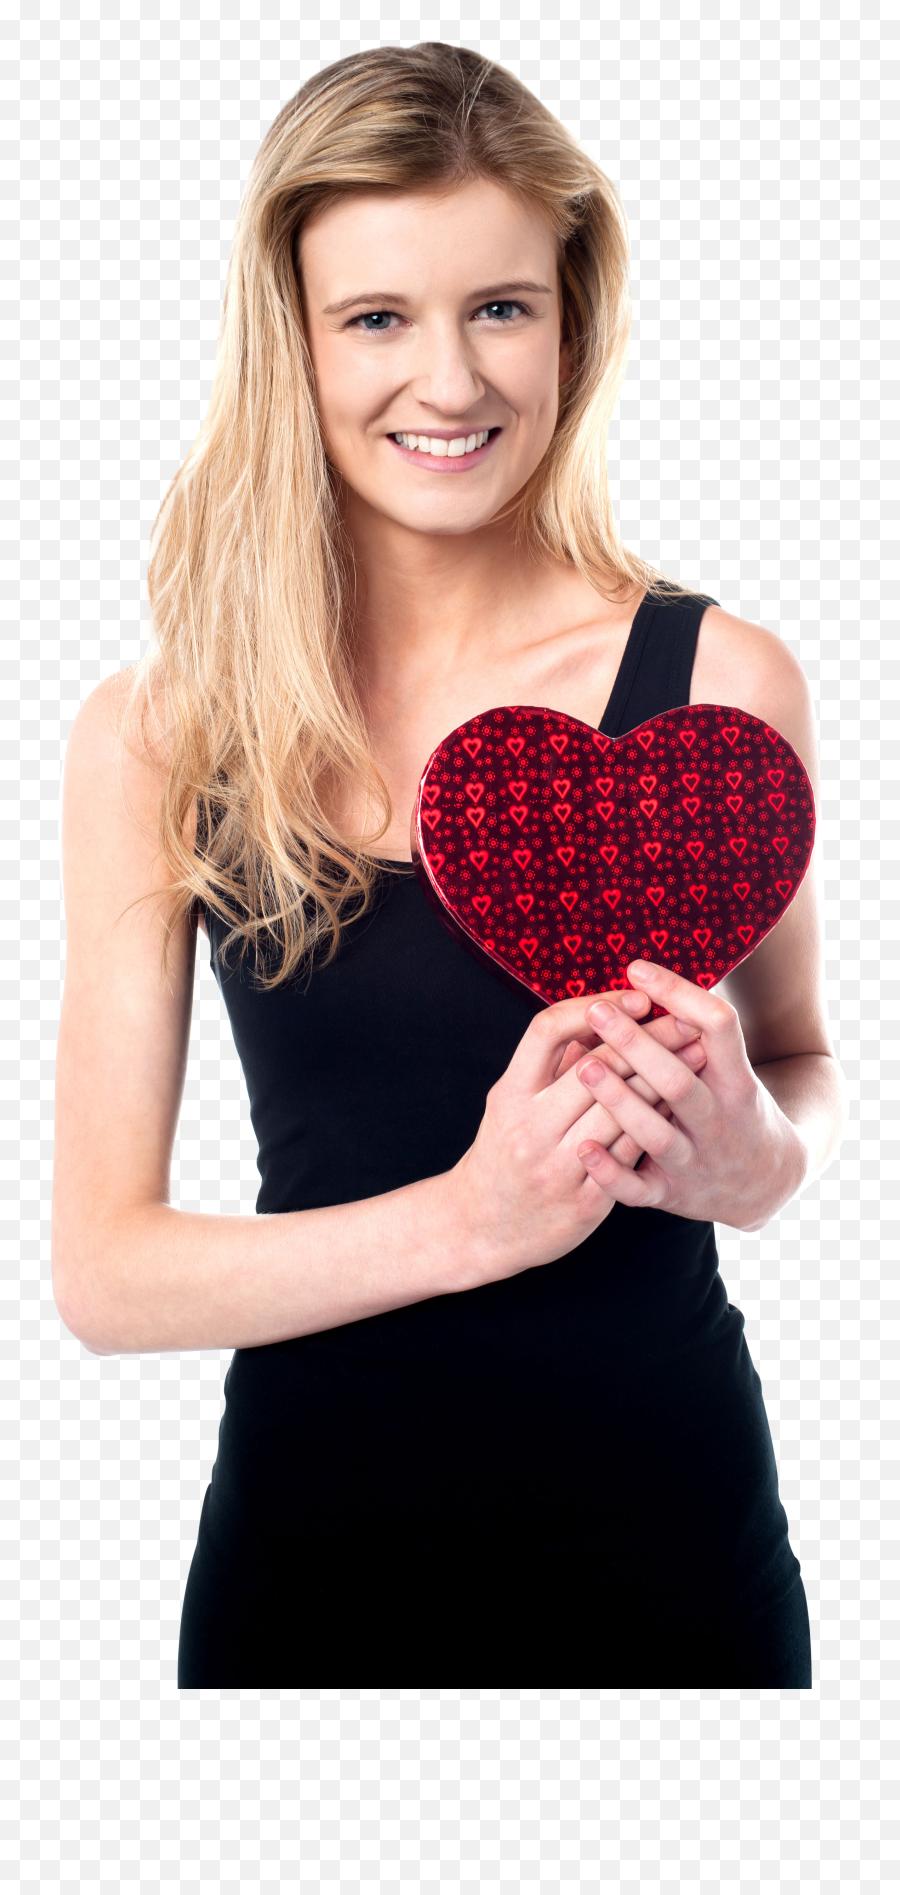 Download Free Png Hd Valentines Day Girl Commercial Use - Portable Network Graphics,Free Pngs For Commercial Use